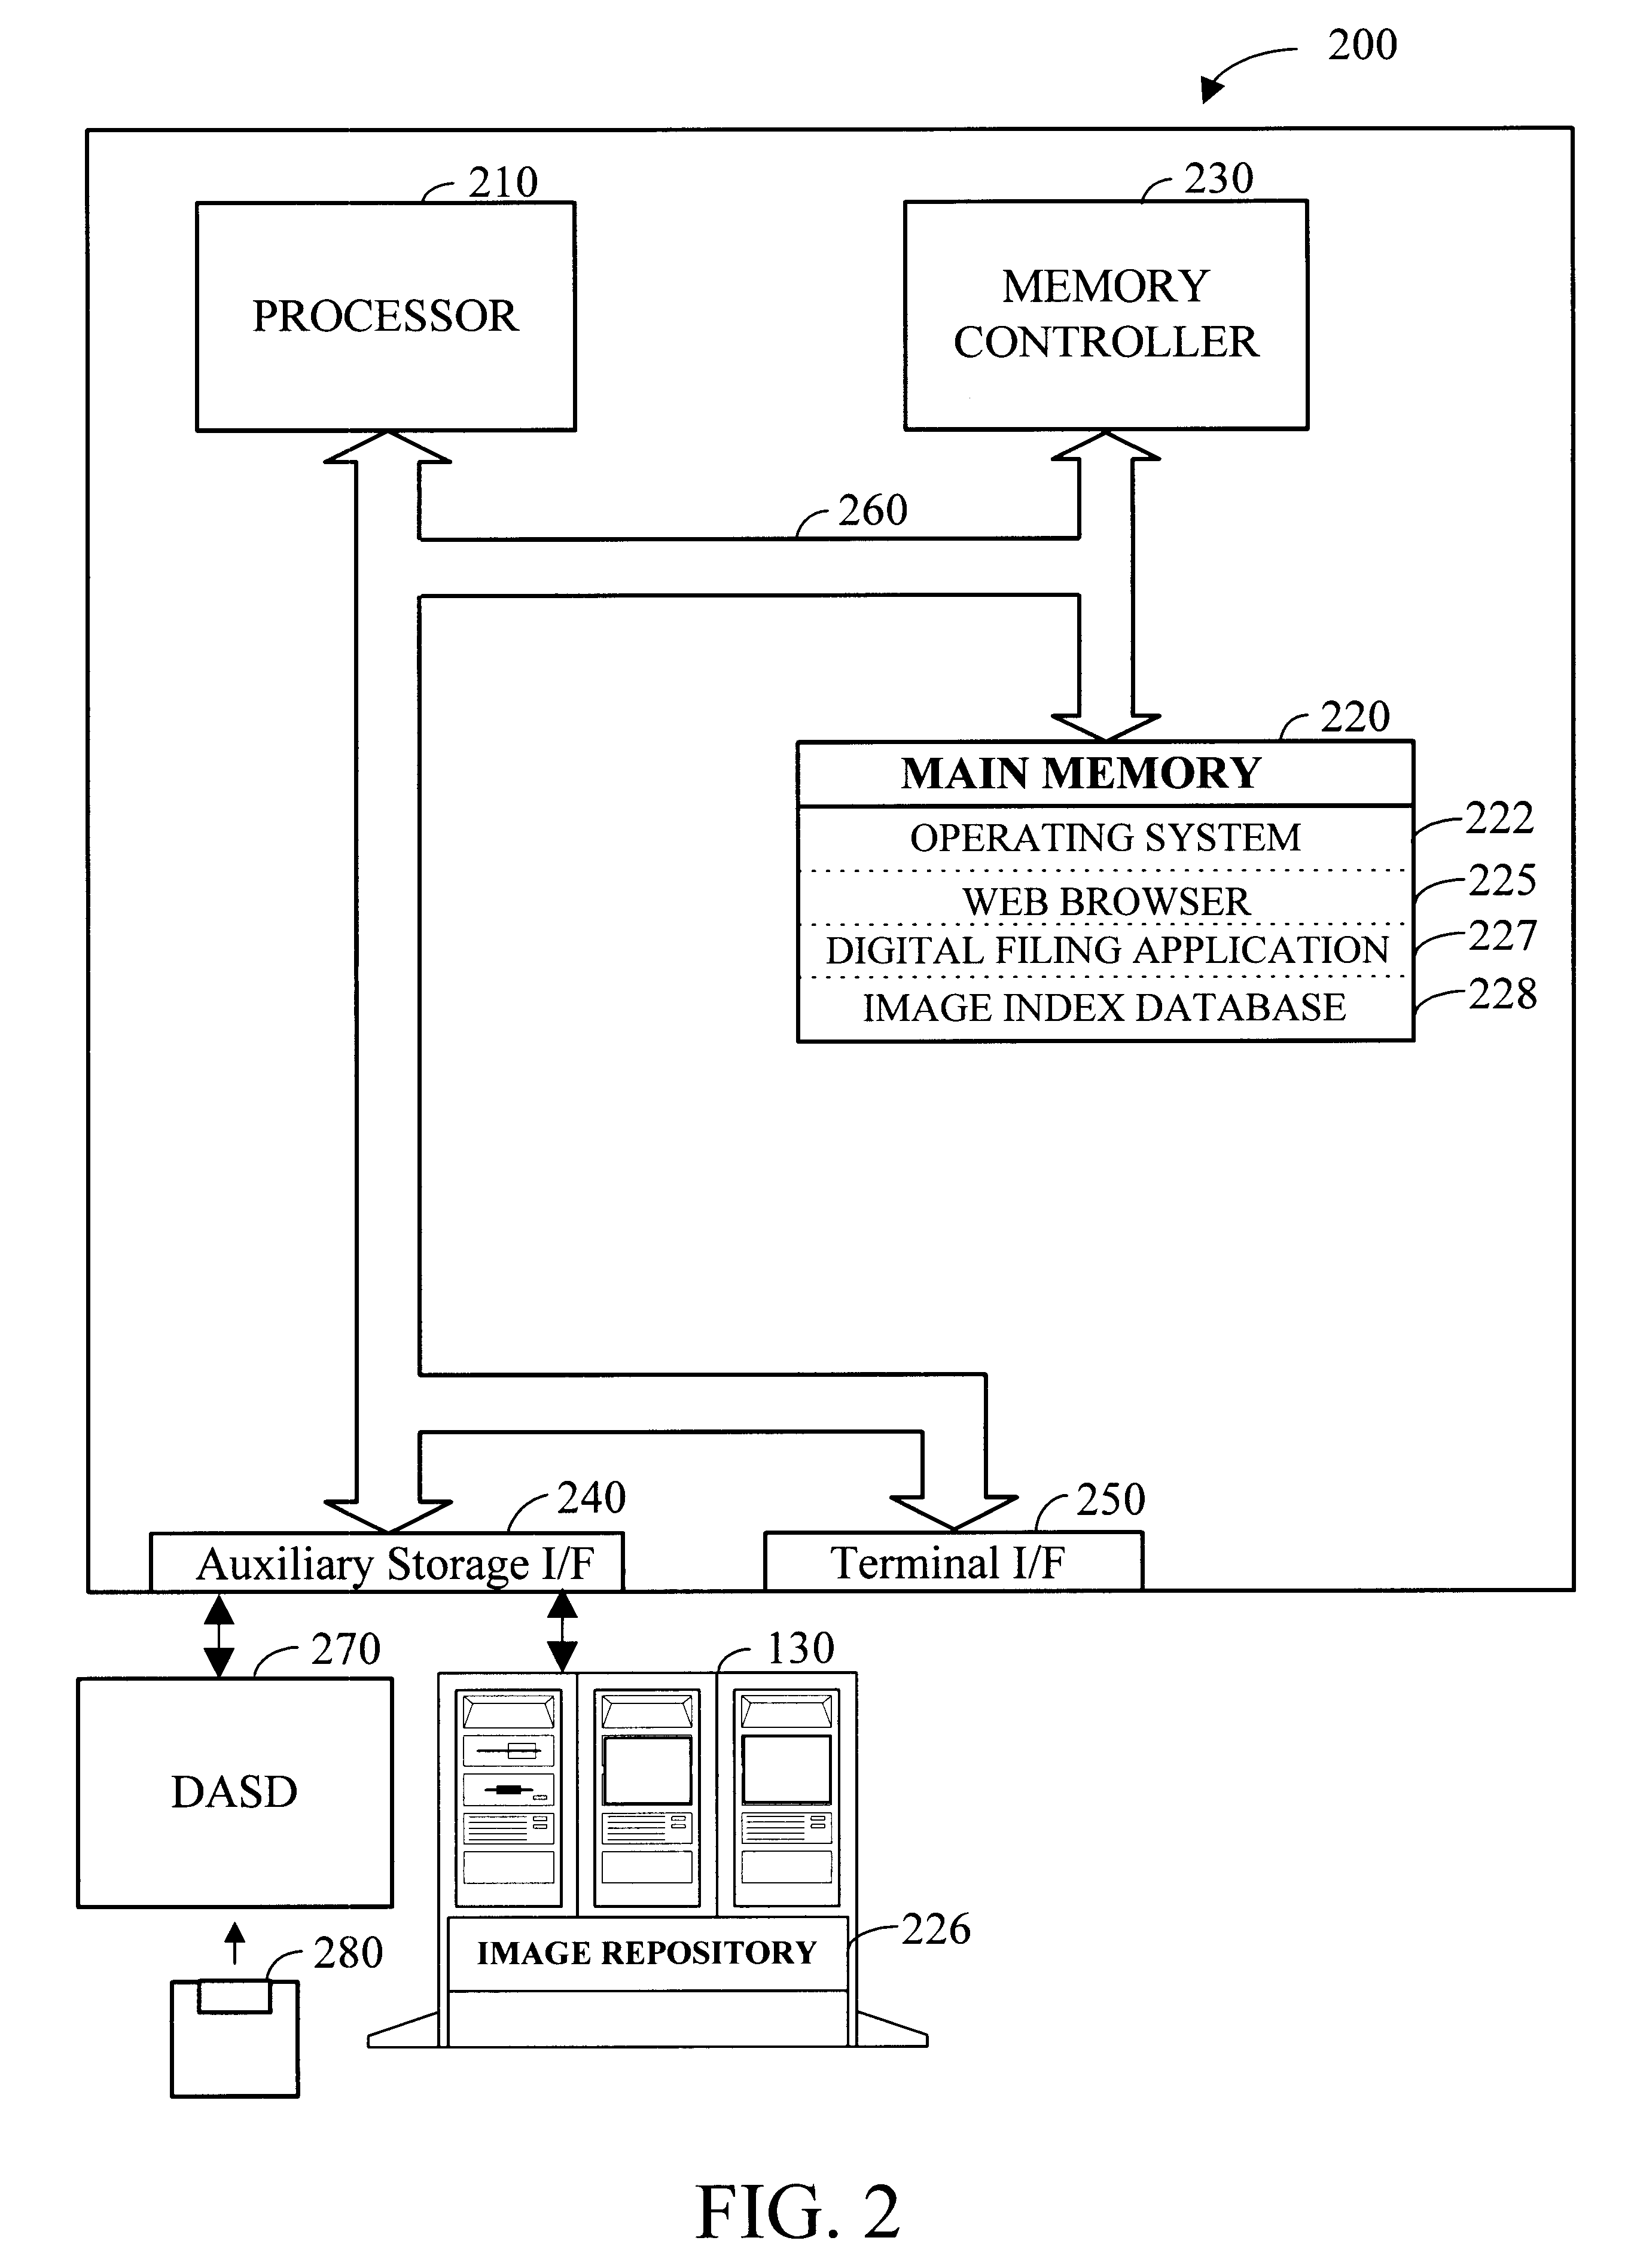 Apparatus and method for simultaneously managing paper-based documents and digital images of the same